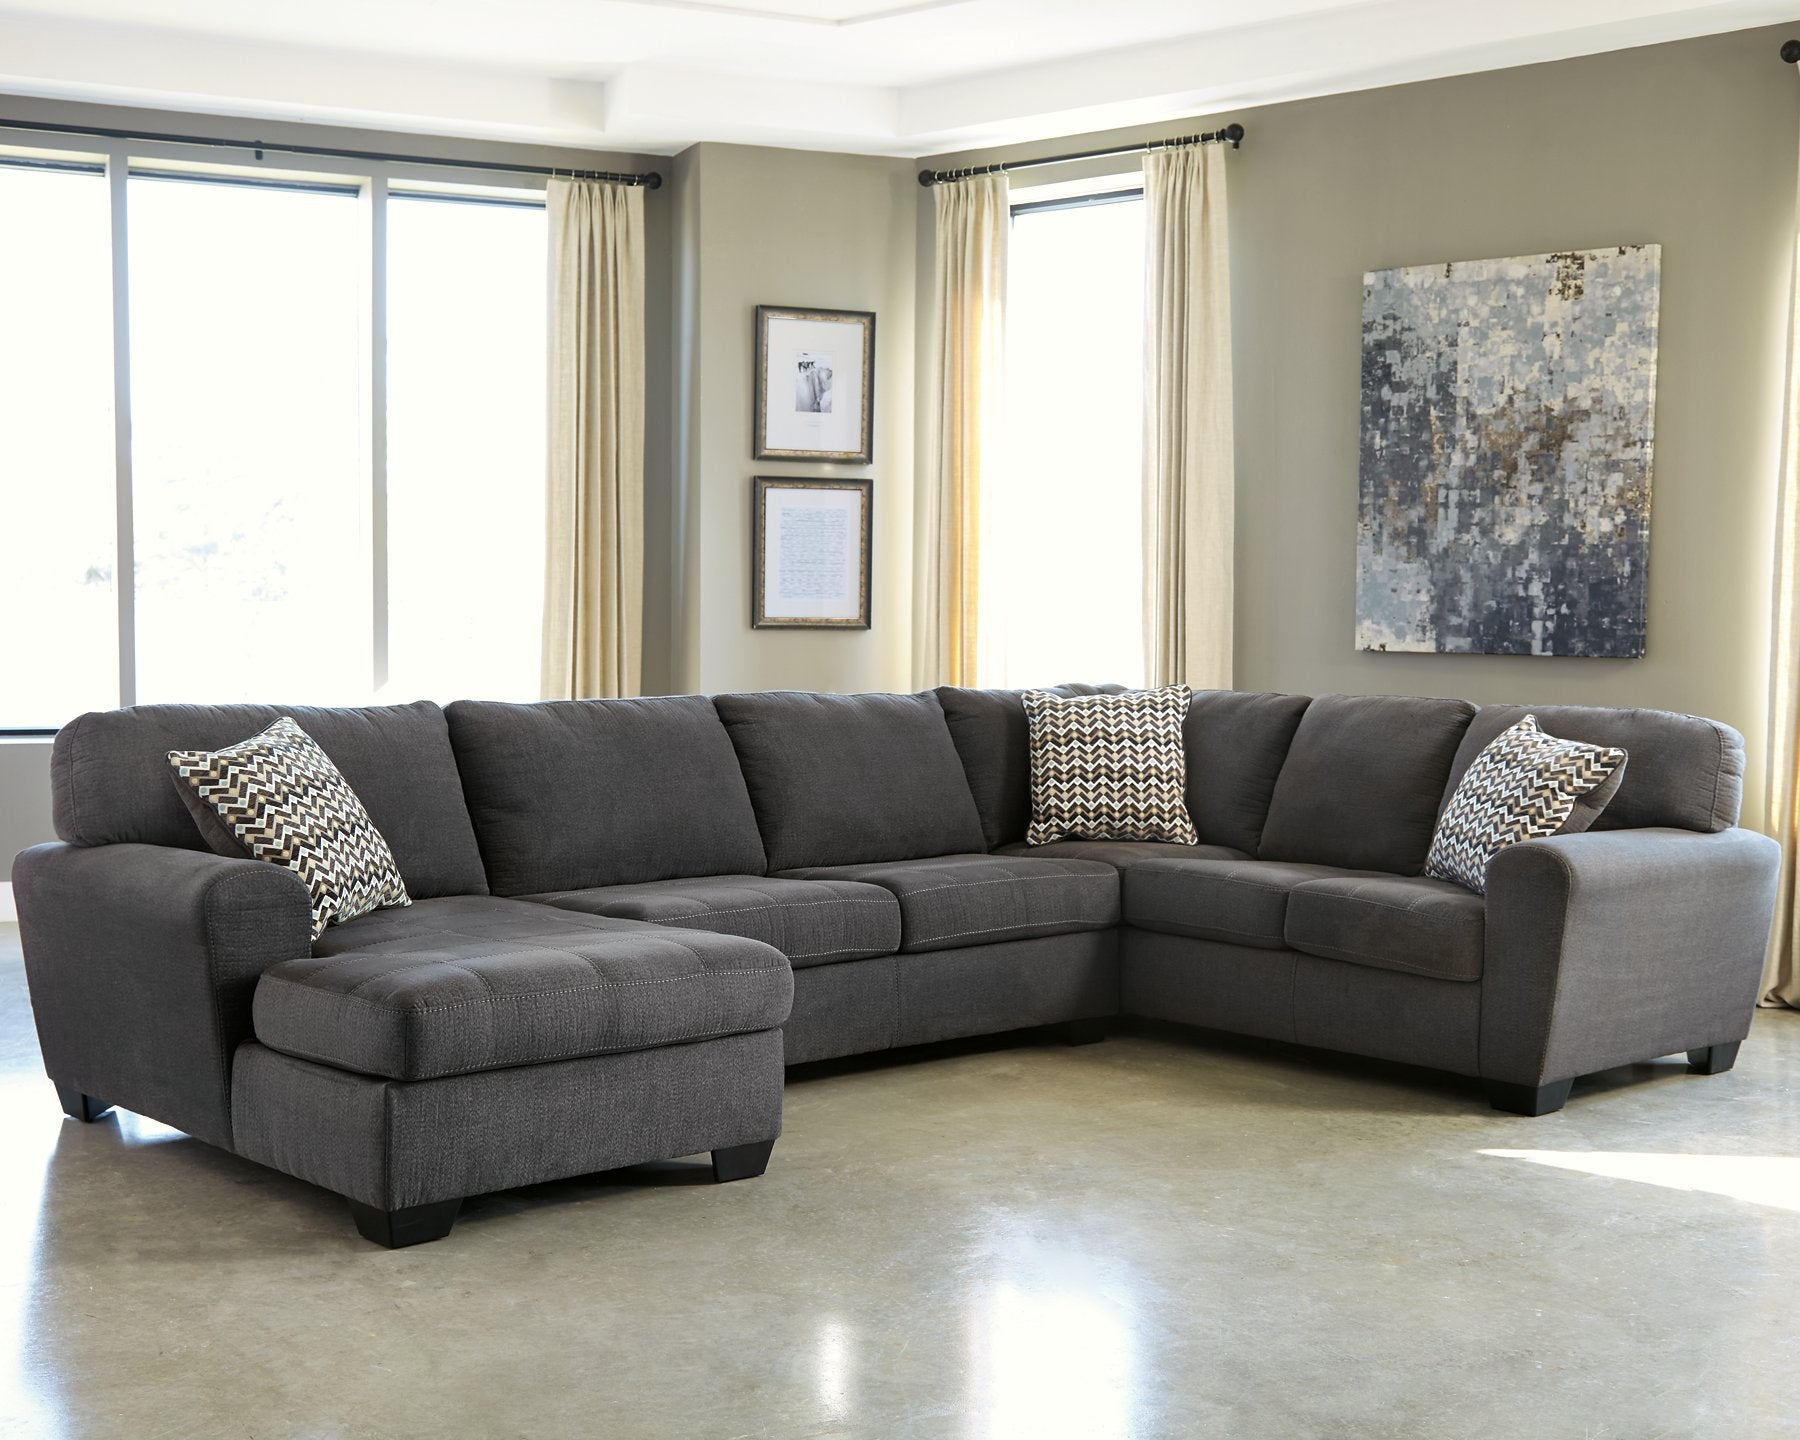 Ambee 3-Piece Sectional with Chaise Ambee 3-Piece Sectional with Chaise Half Price Furniture